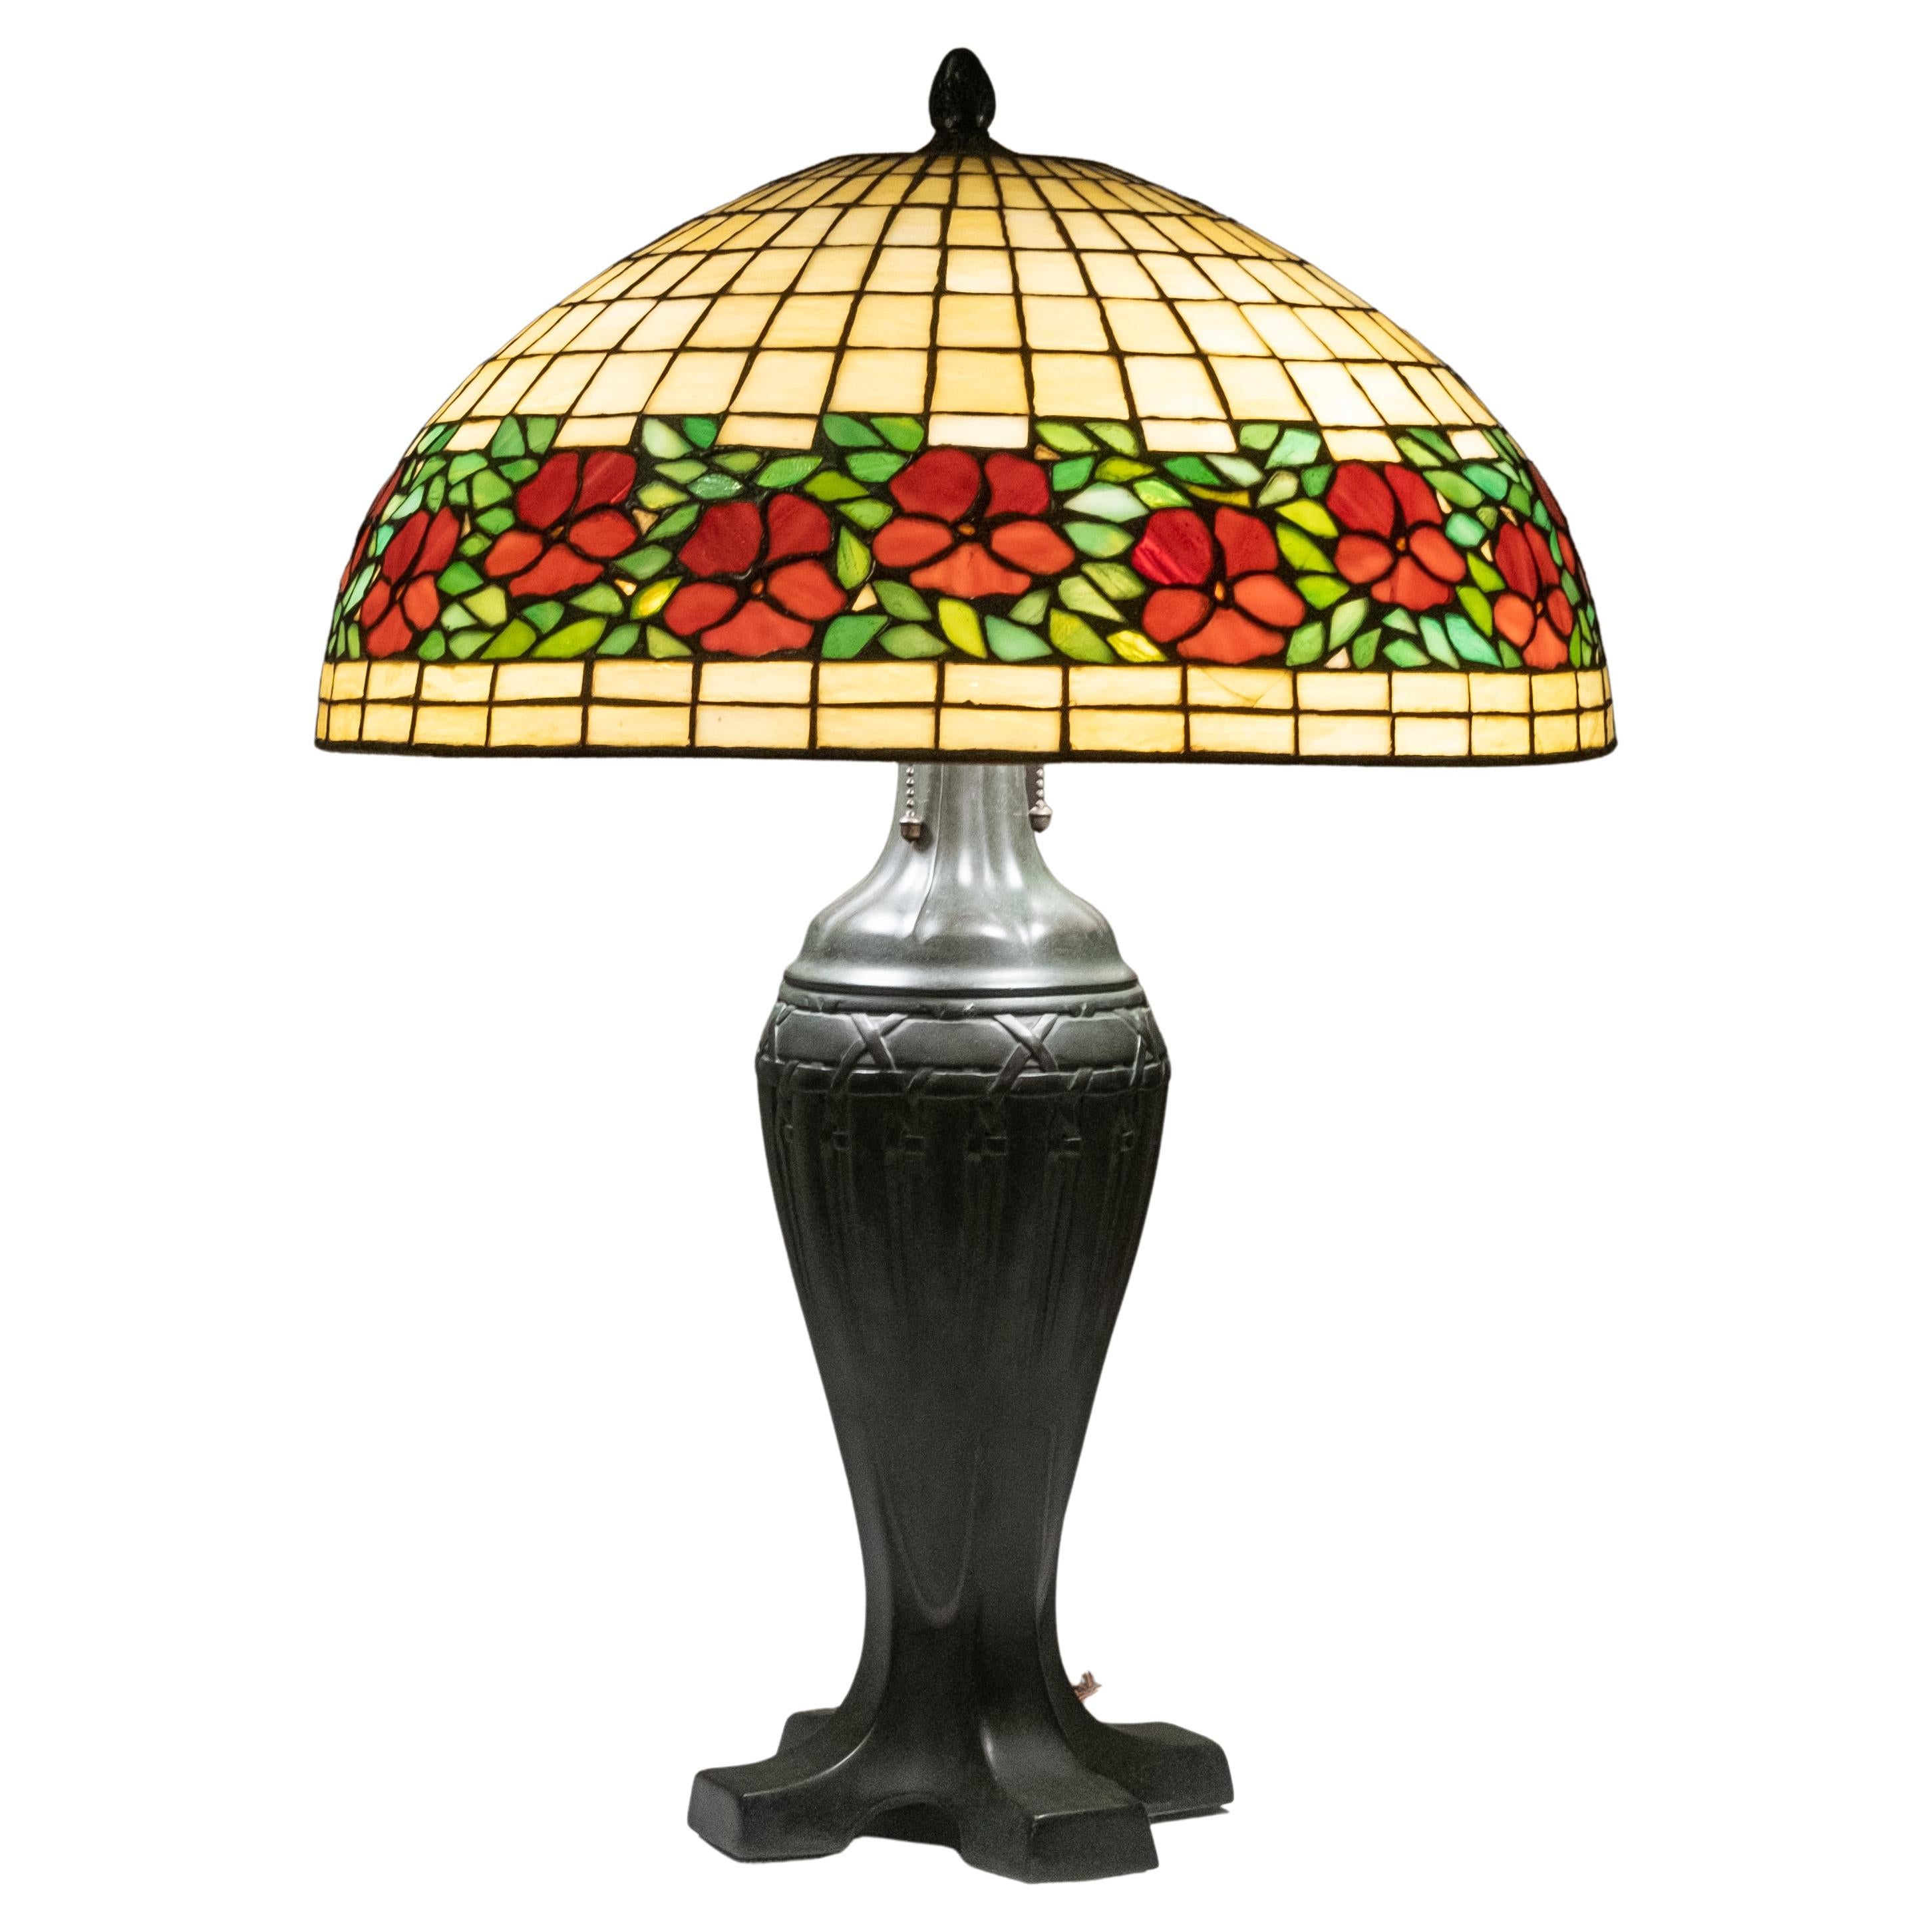 Handel lamp Company. First quarter 20th century. Leaded stained glass 'Cherry Blossom' shade, on a Handel arts and crafts bronze urn-form base with three lights and acorn pulls. Marked to rim of shade 'Handel' flanked by stars;. The base is